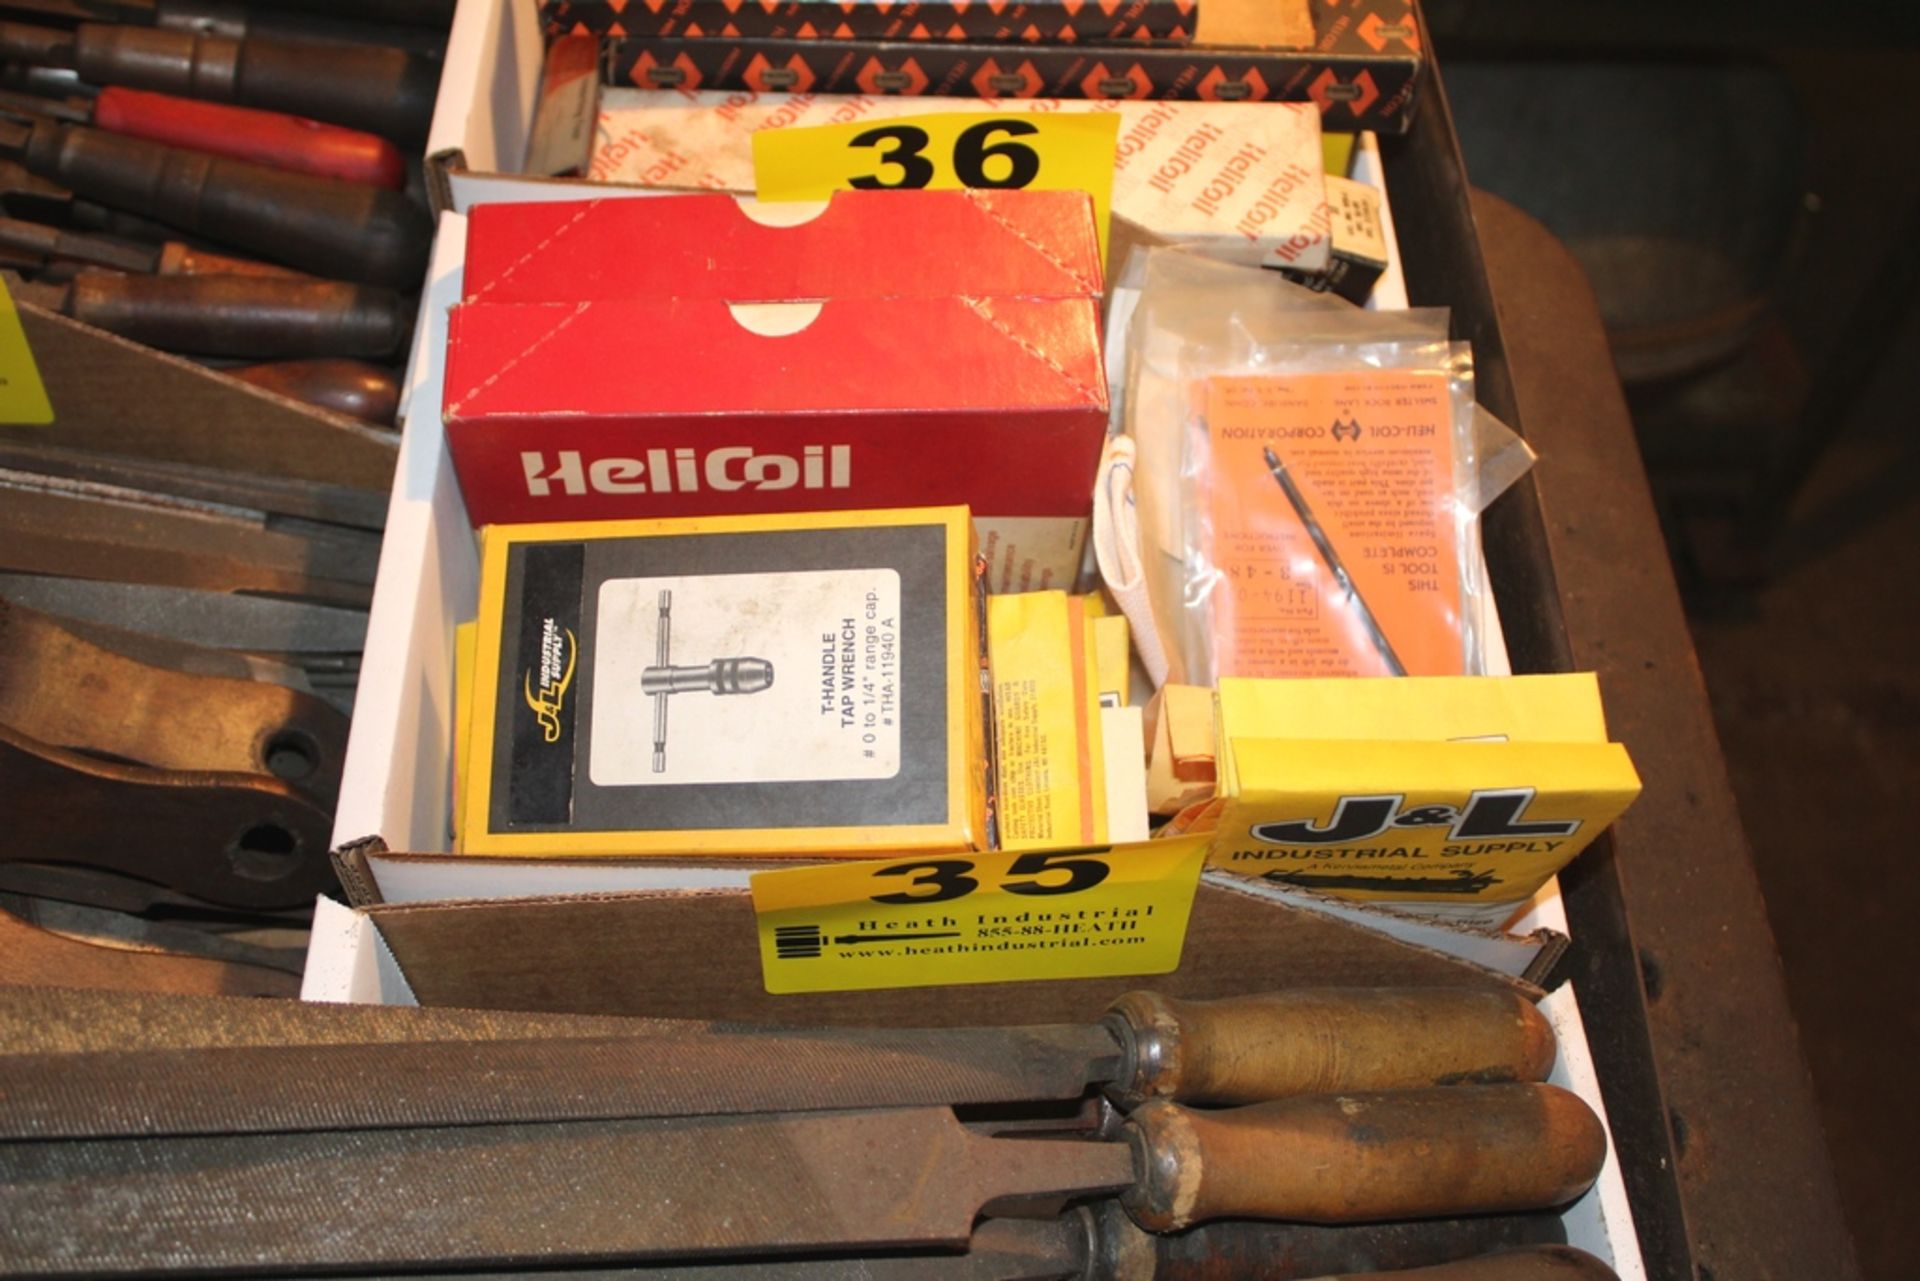 HELICOIL & ASSORTED THREAD REPAIR KITS IN BOX